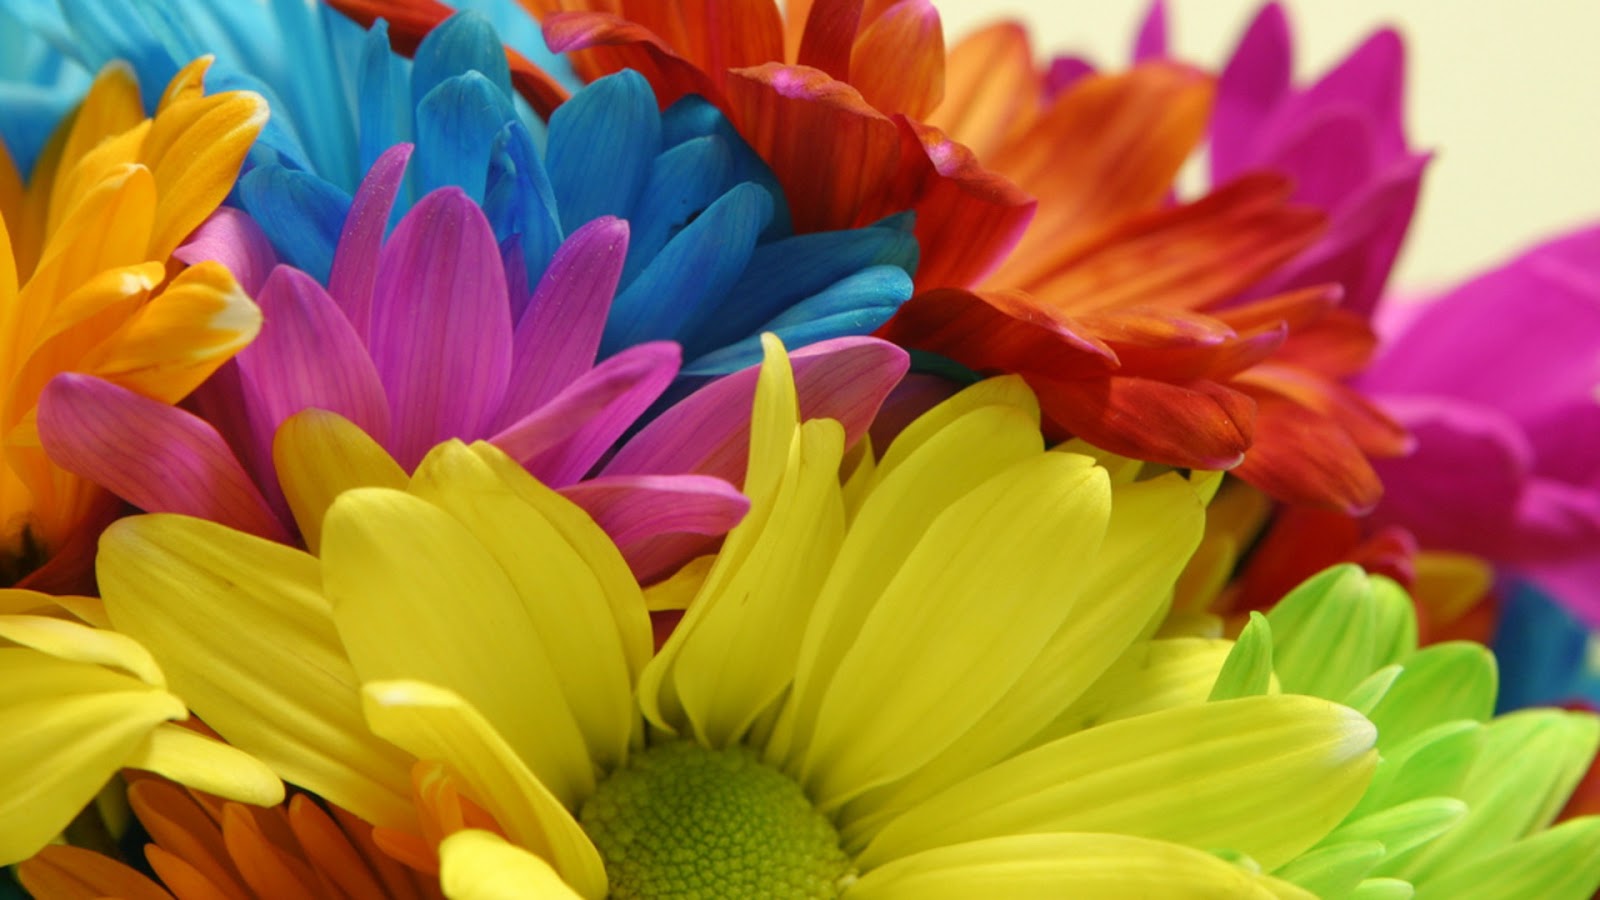 Flowers Flower Wallpaper Colorful Pictures